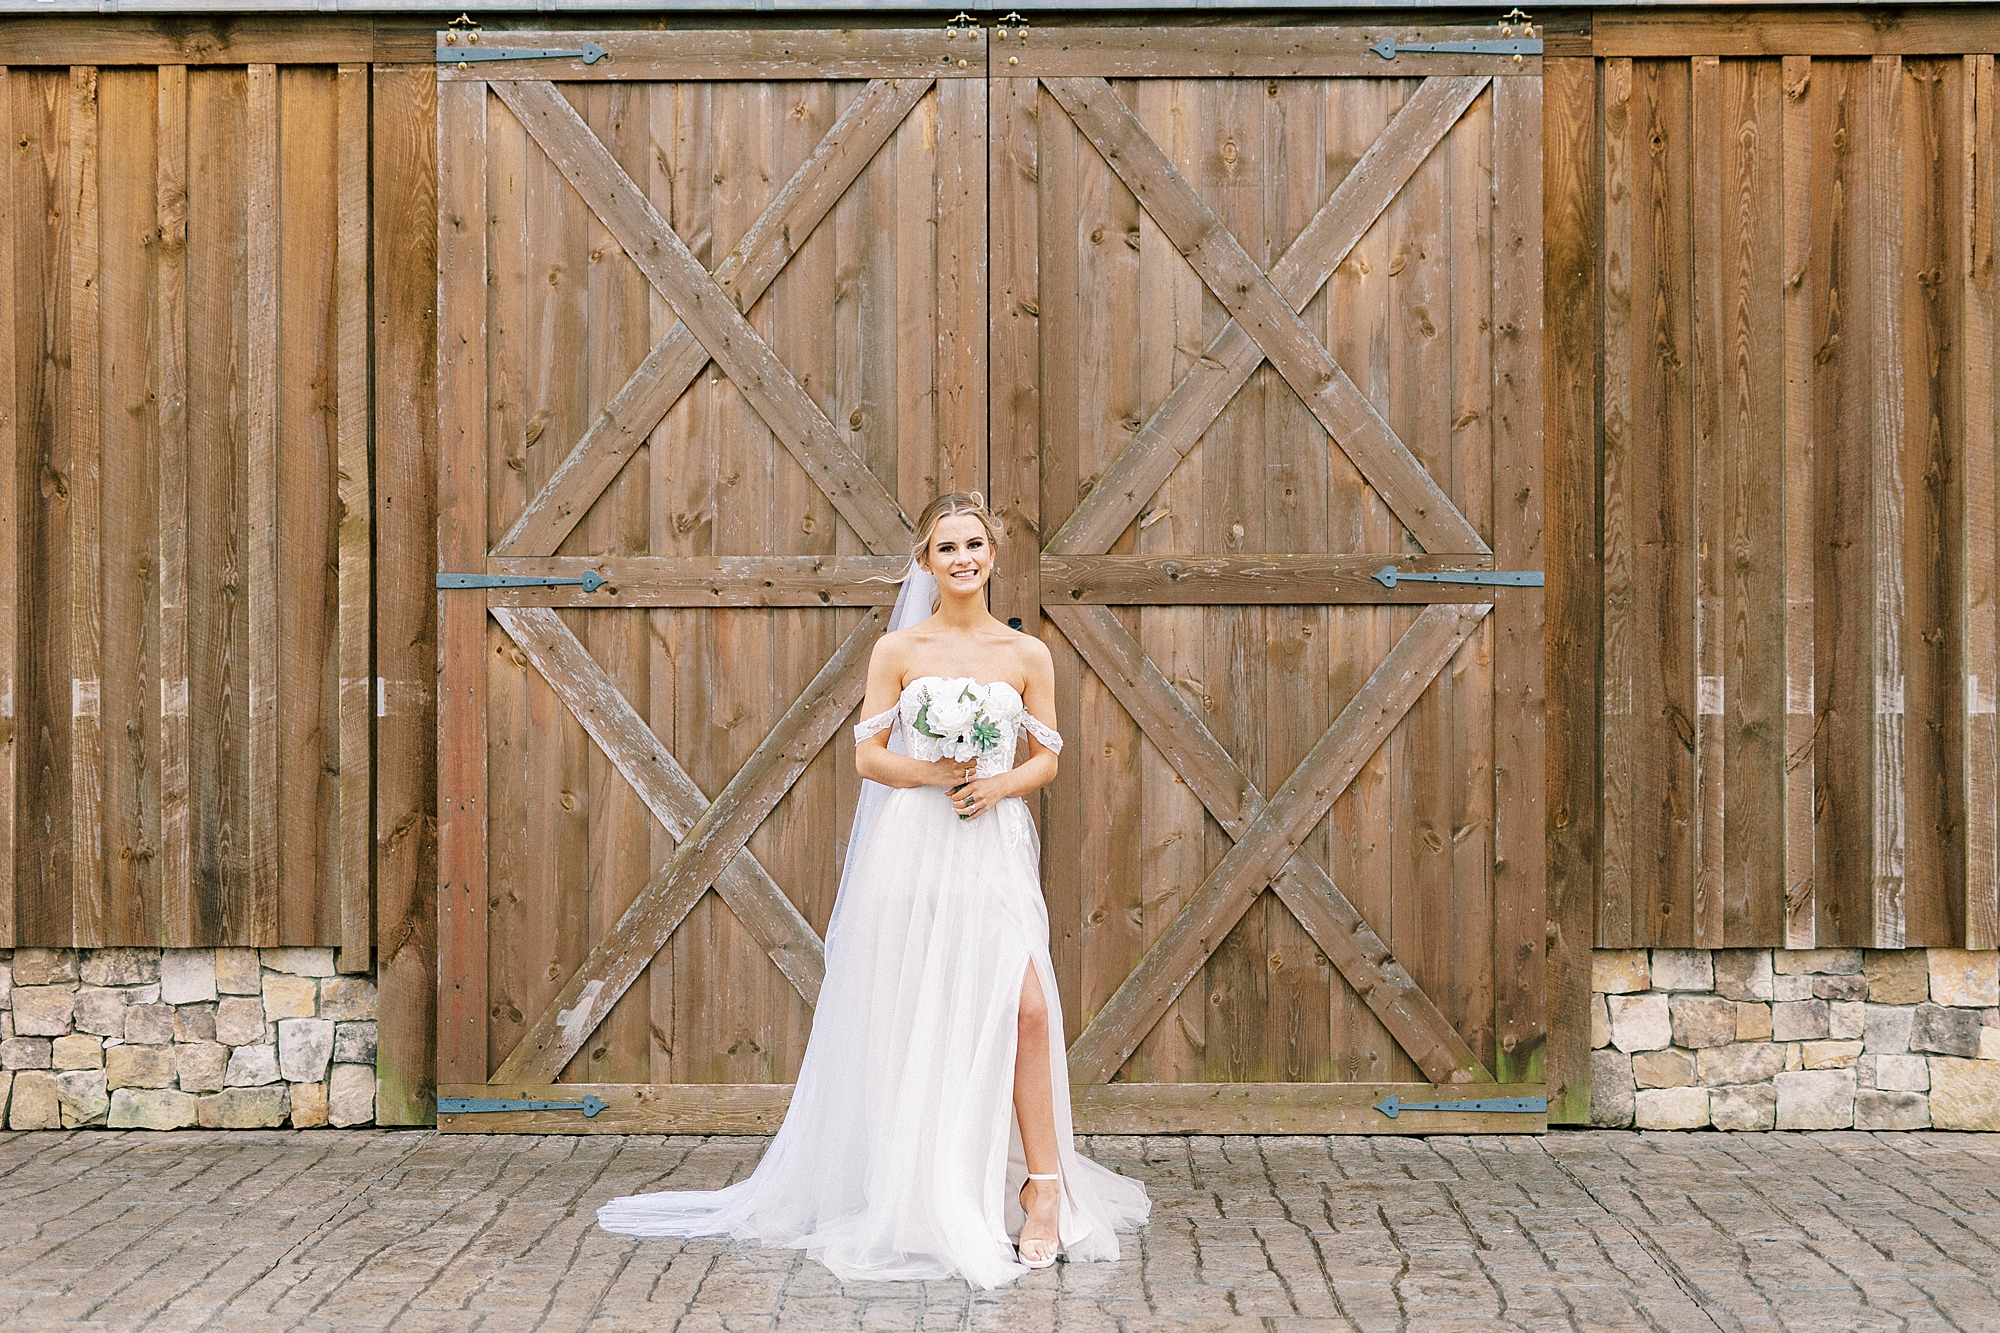 bride poses in wedding dress holding white bouquet by barn doors